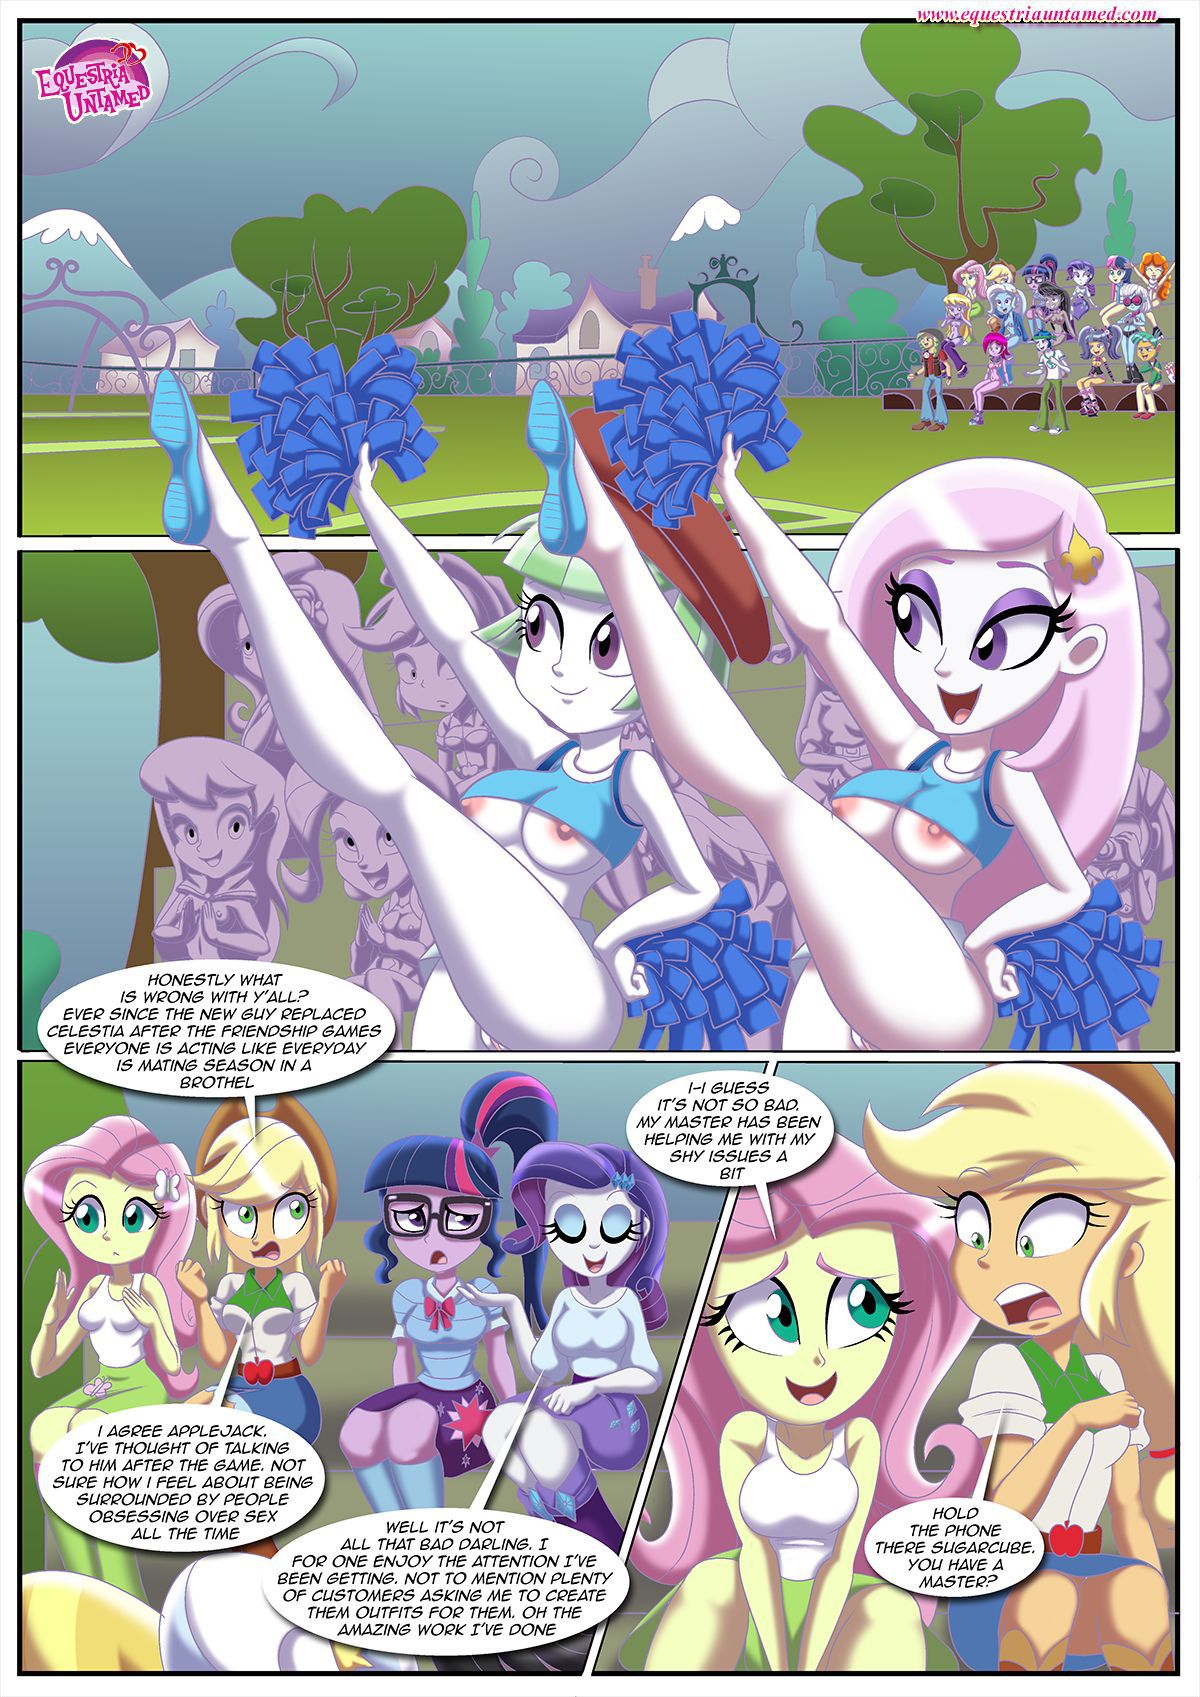 [Palcomix] Sex Reeducation | (My Little Pony: Friendship is Magic) (Ongoing) (English) 5